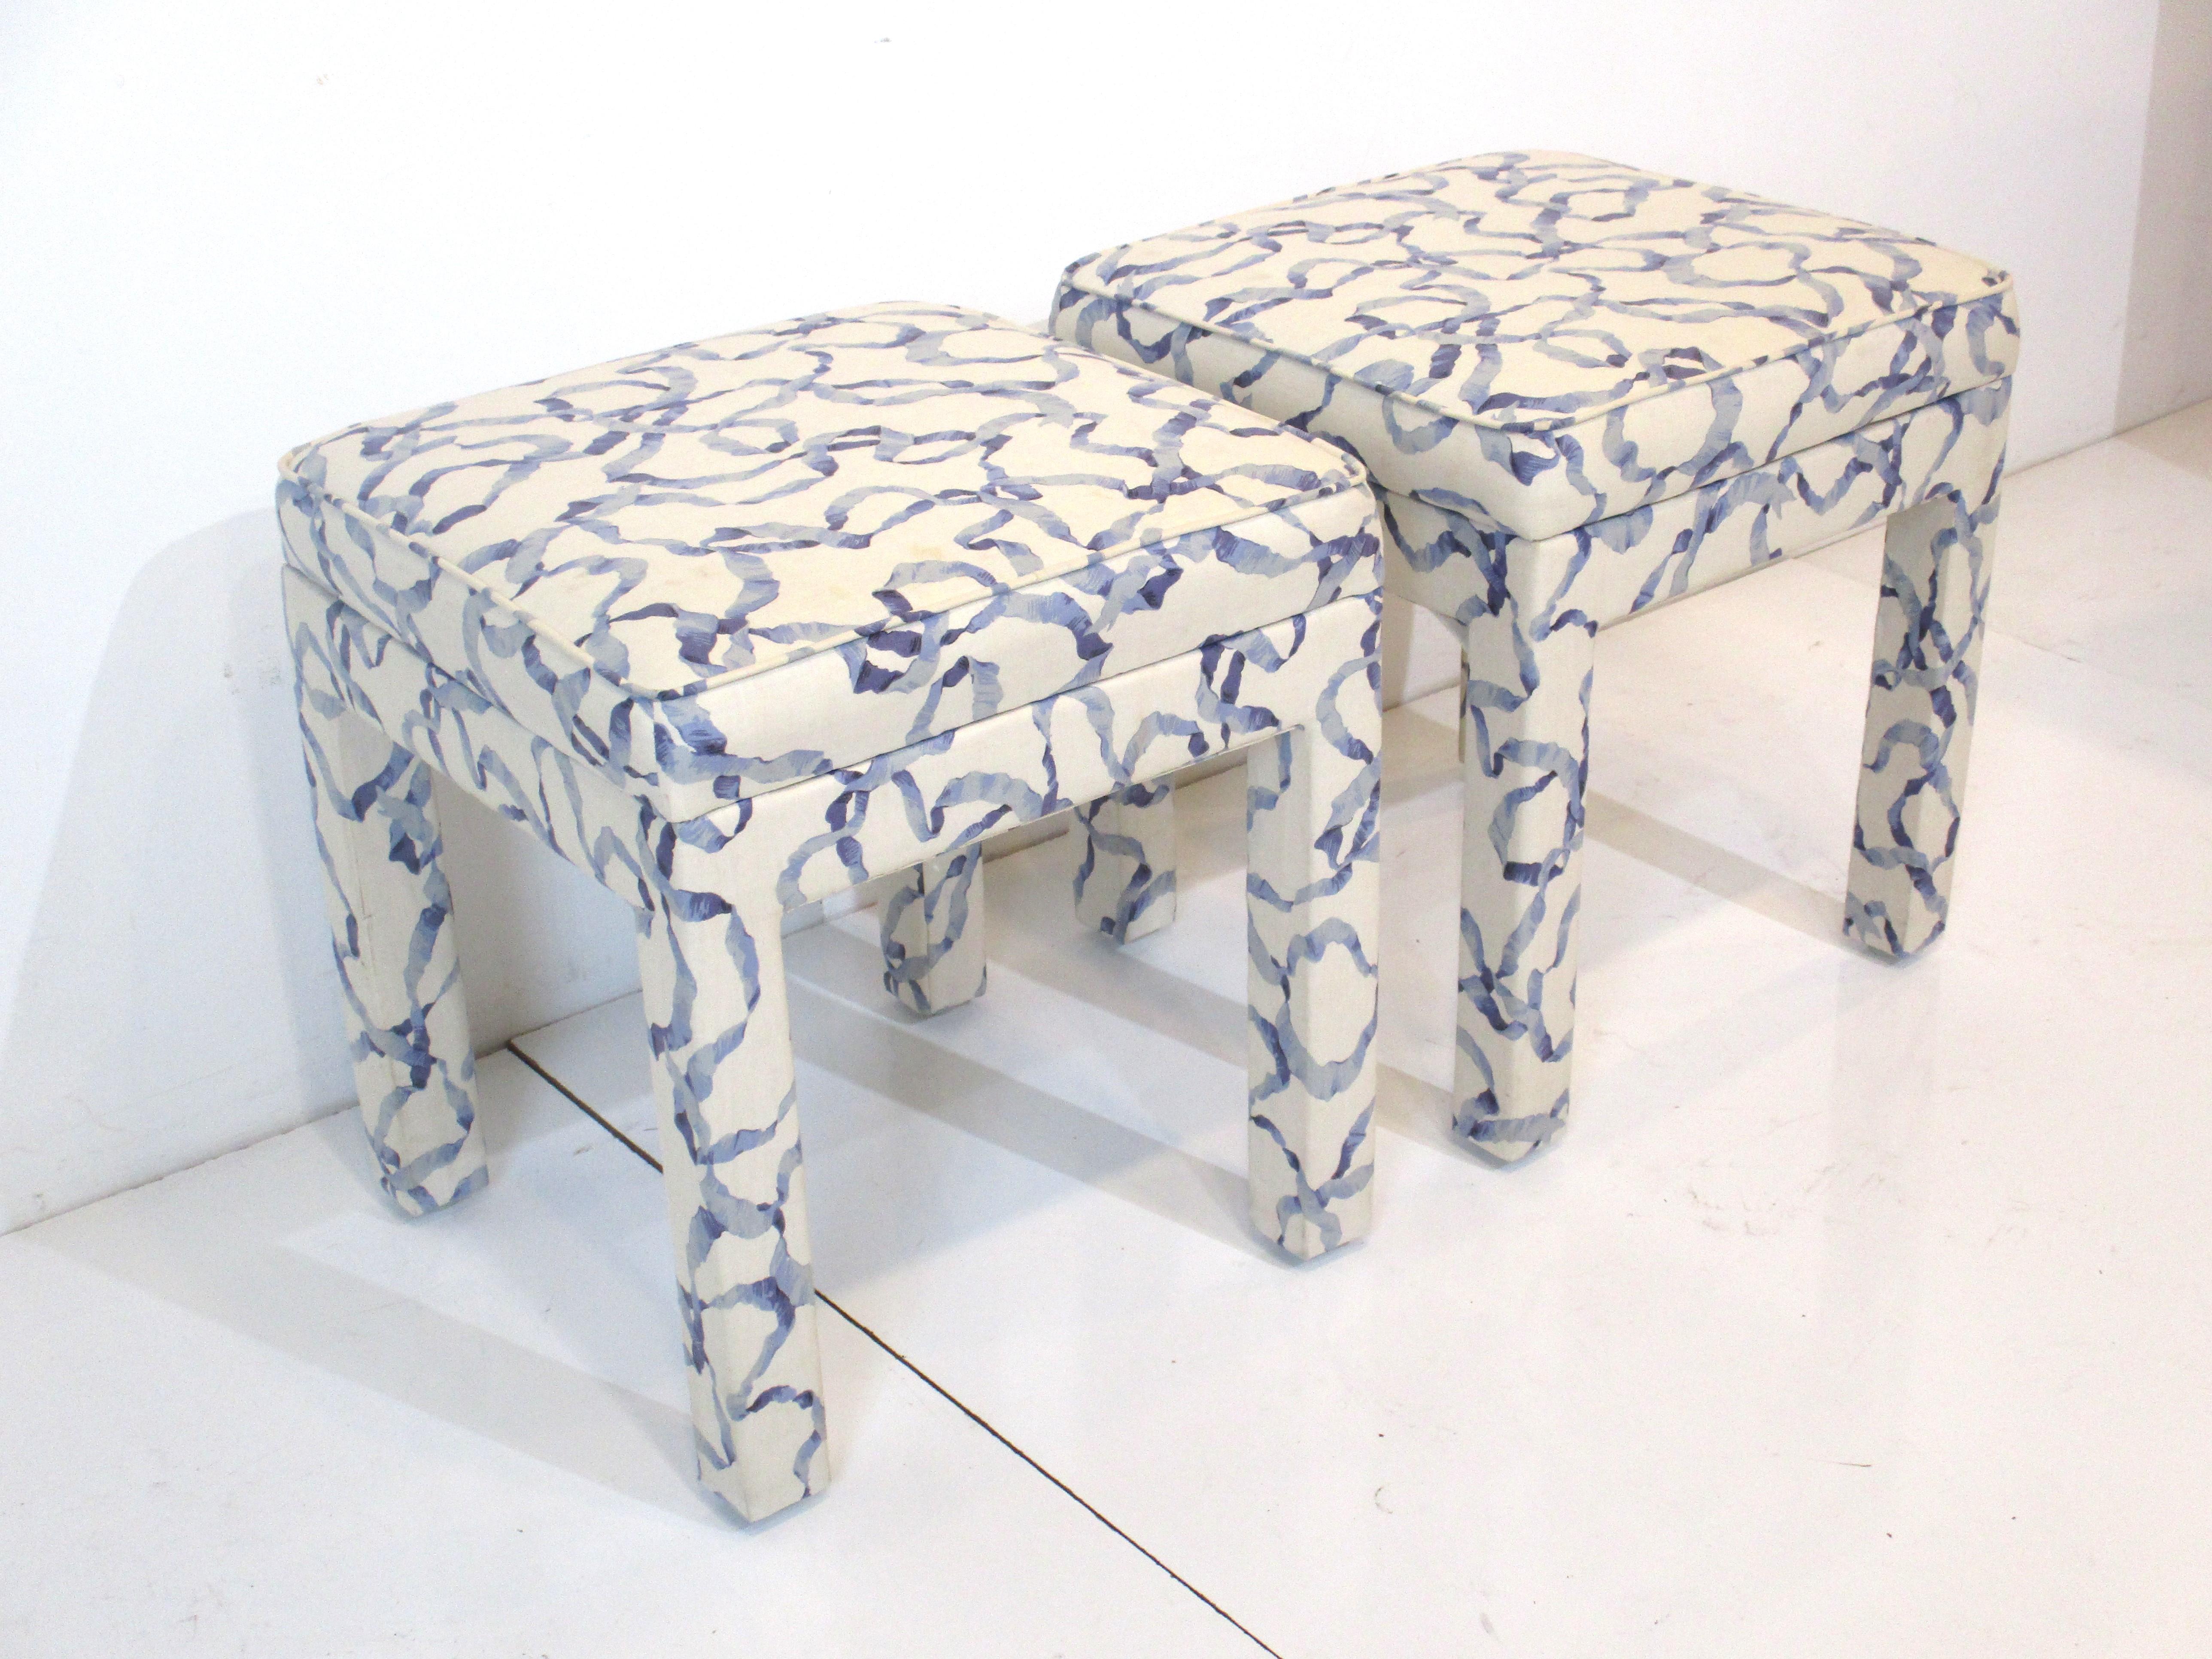 A pair of nicely sized upholstered stools in a blue and cream fabric perfect for extra seating or stored under a console table . Manufactured in the manner of the Henredon Furniture company.